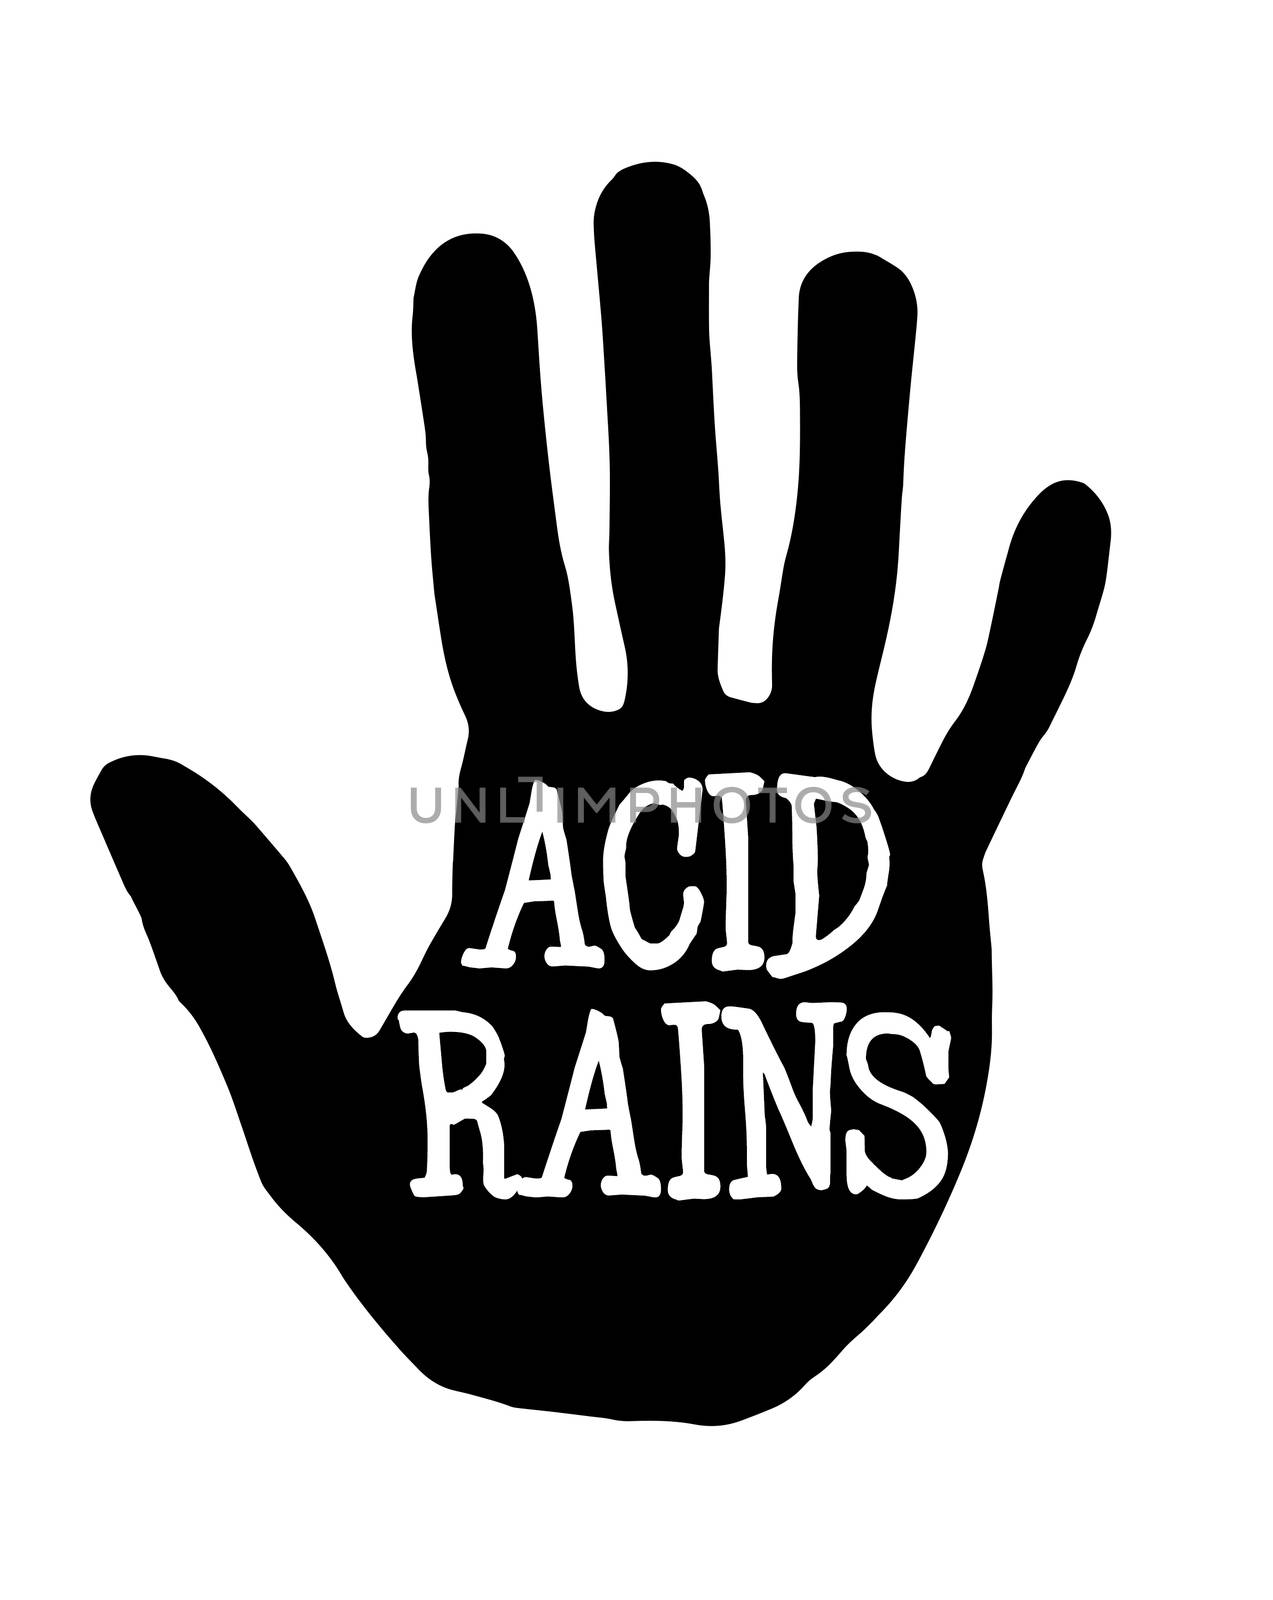 Man handprint isolated on white background showing stop acid rains